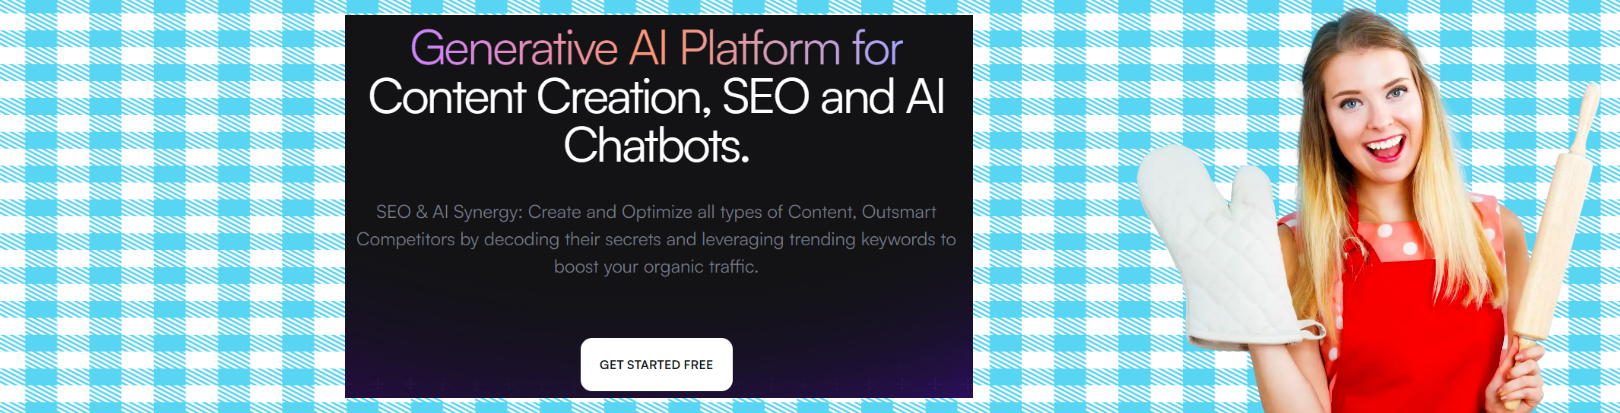 SEO & AI Synergy: Create and Optimize all types of Content,